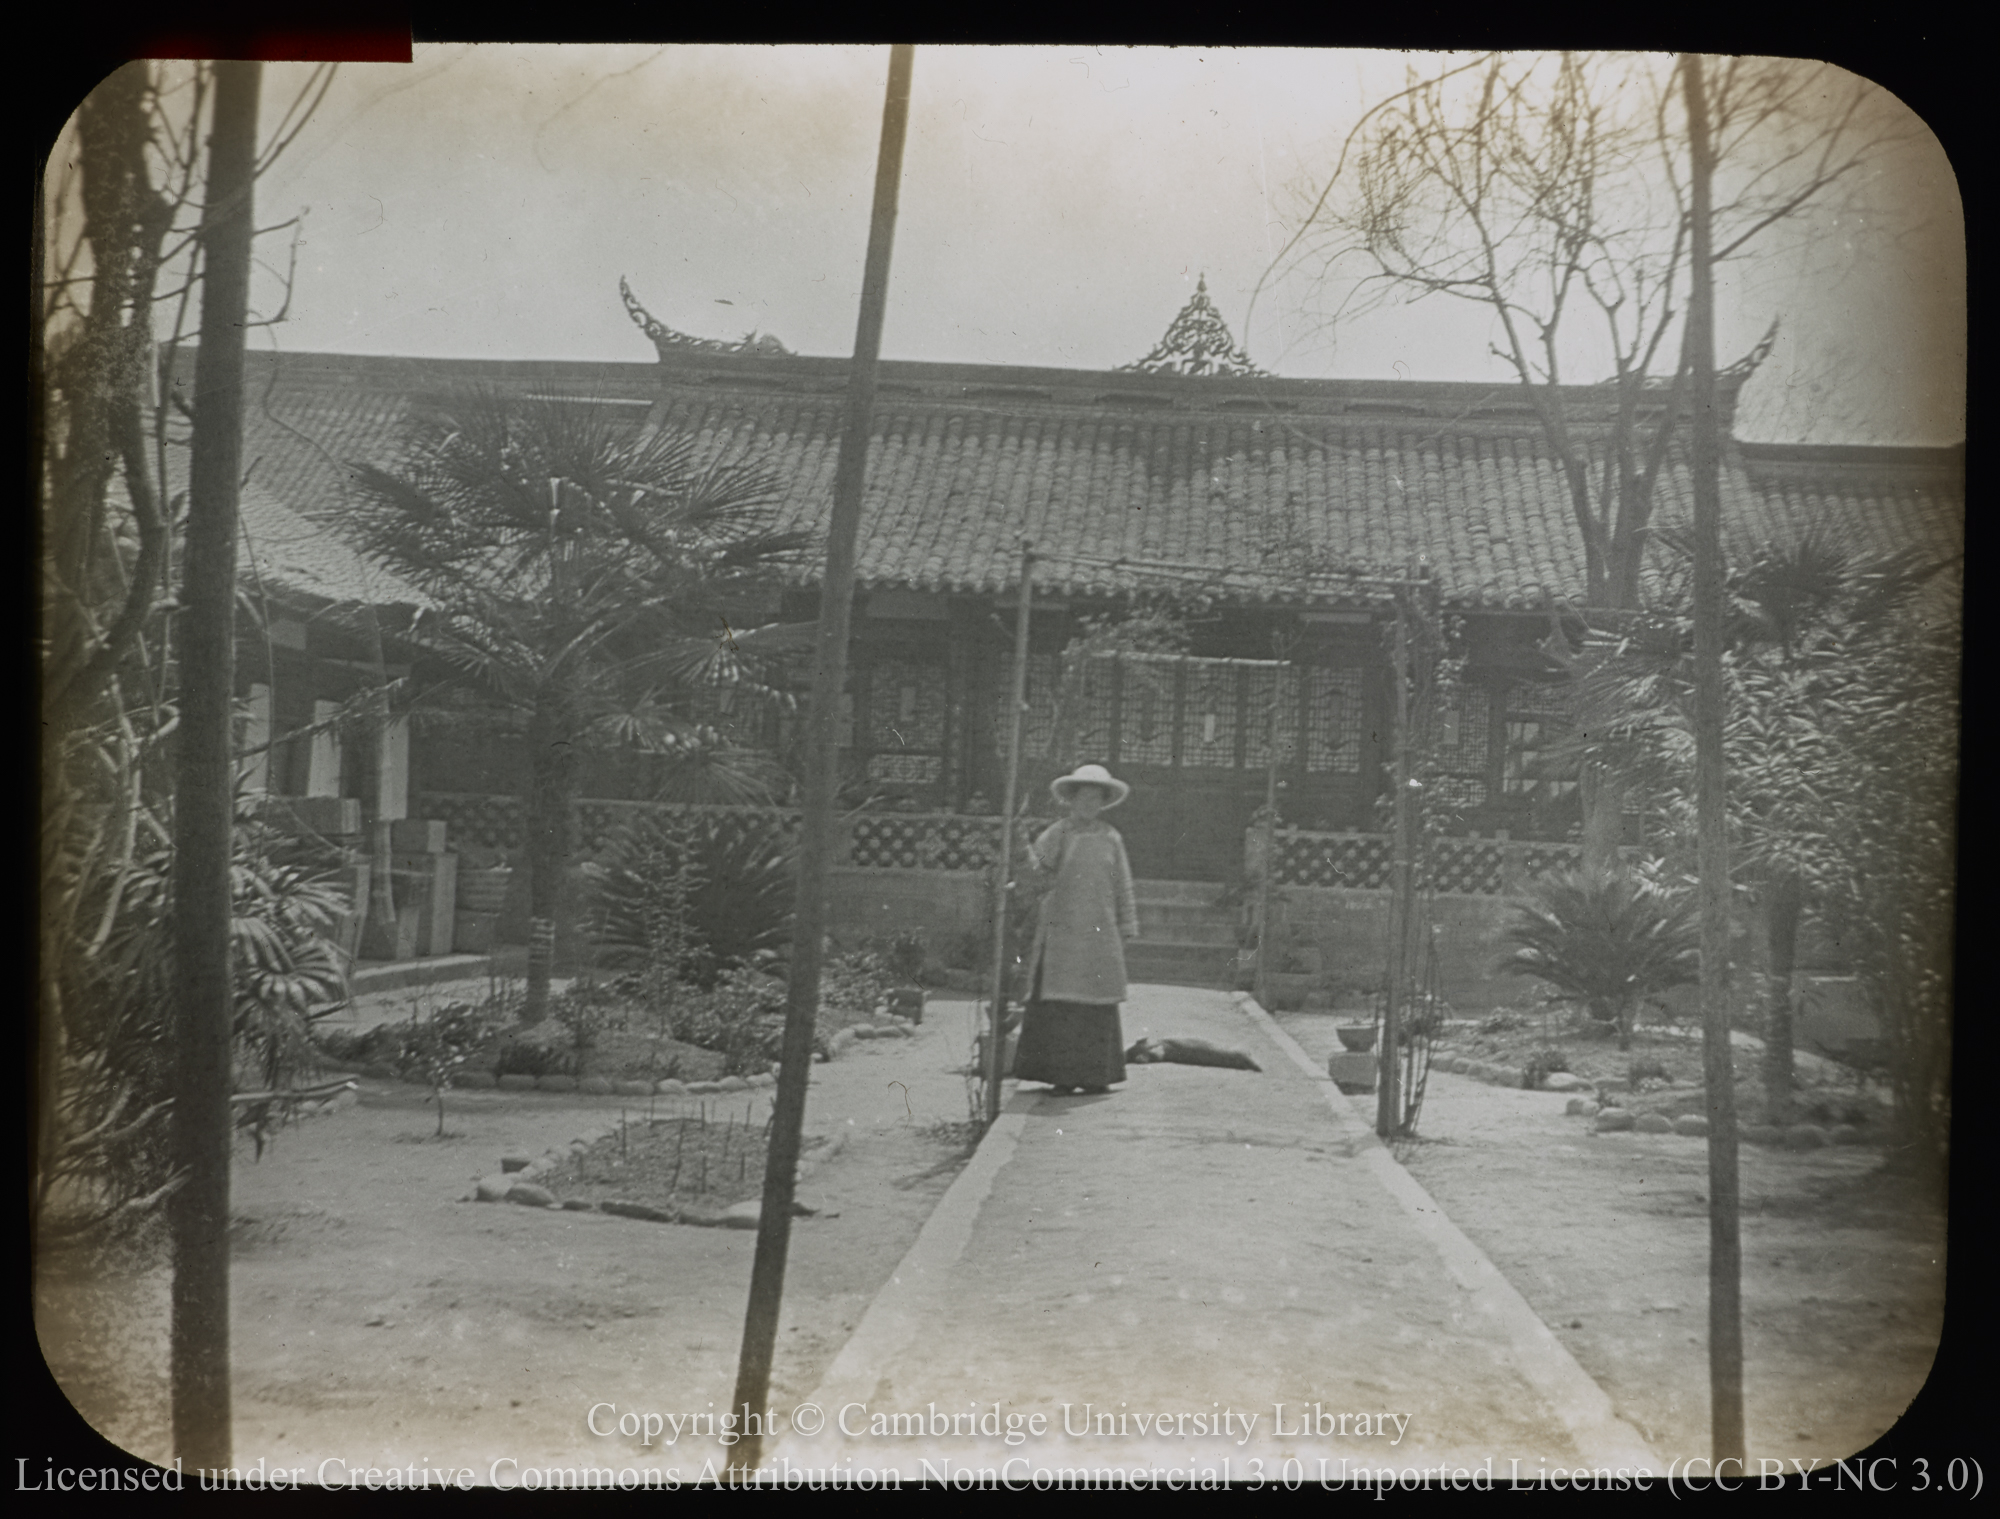 Mienchow Mission House, Western China mission, 1900 - 1920